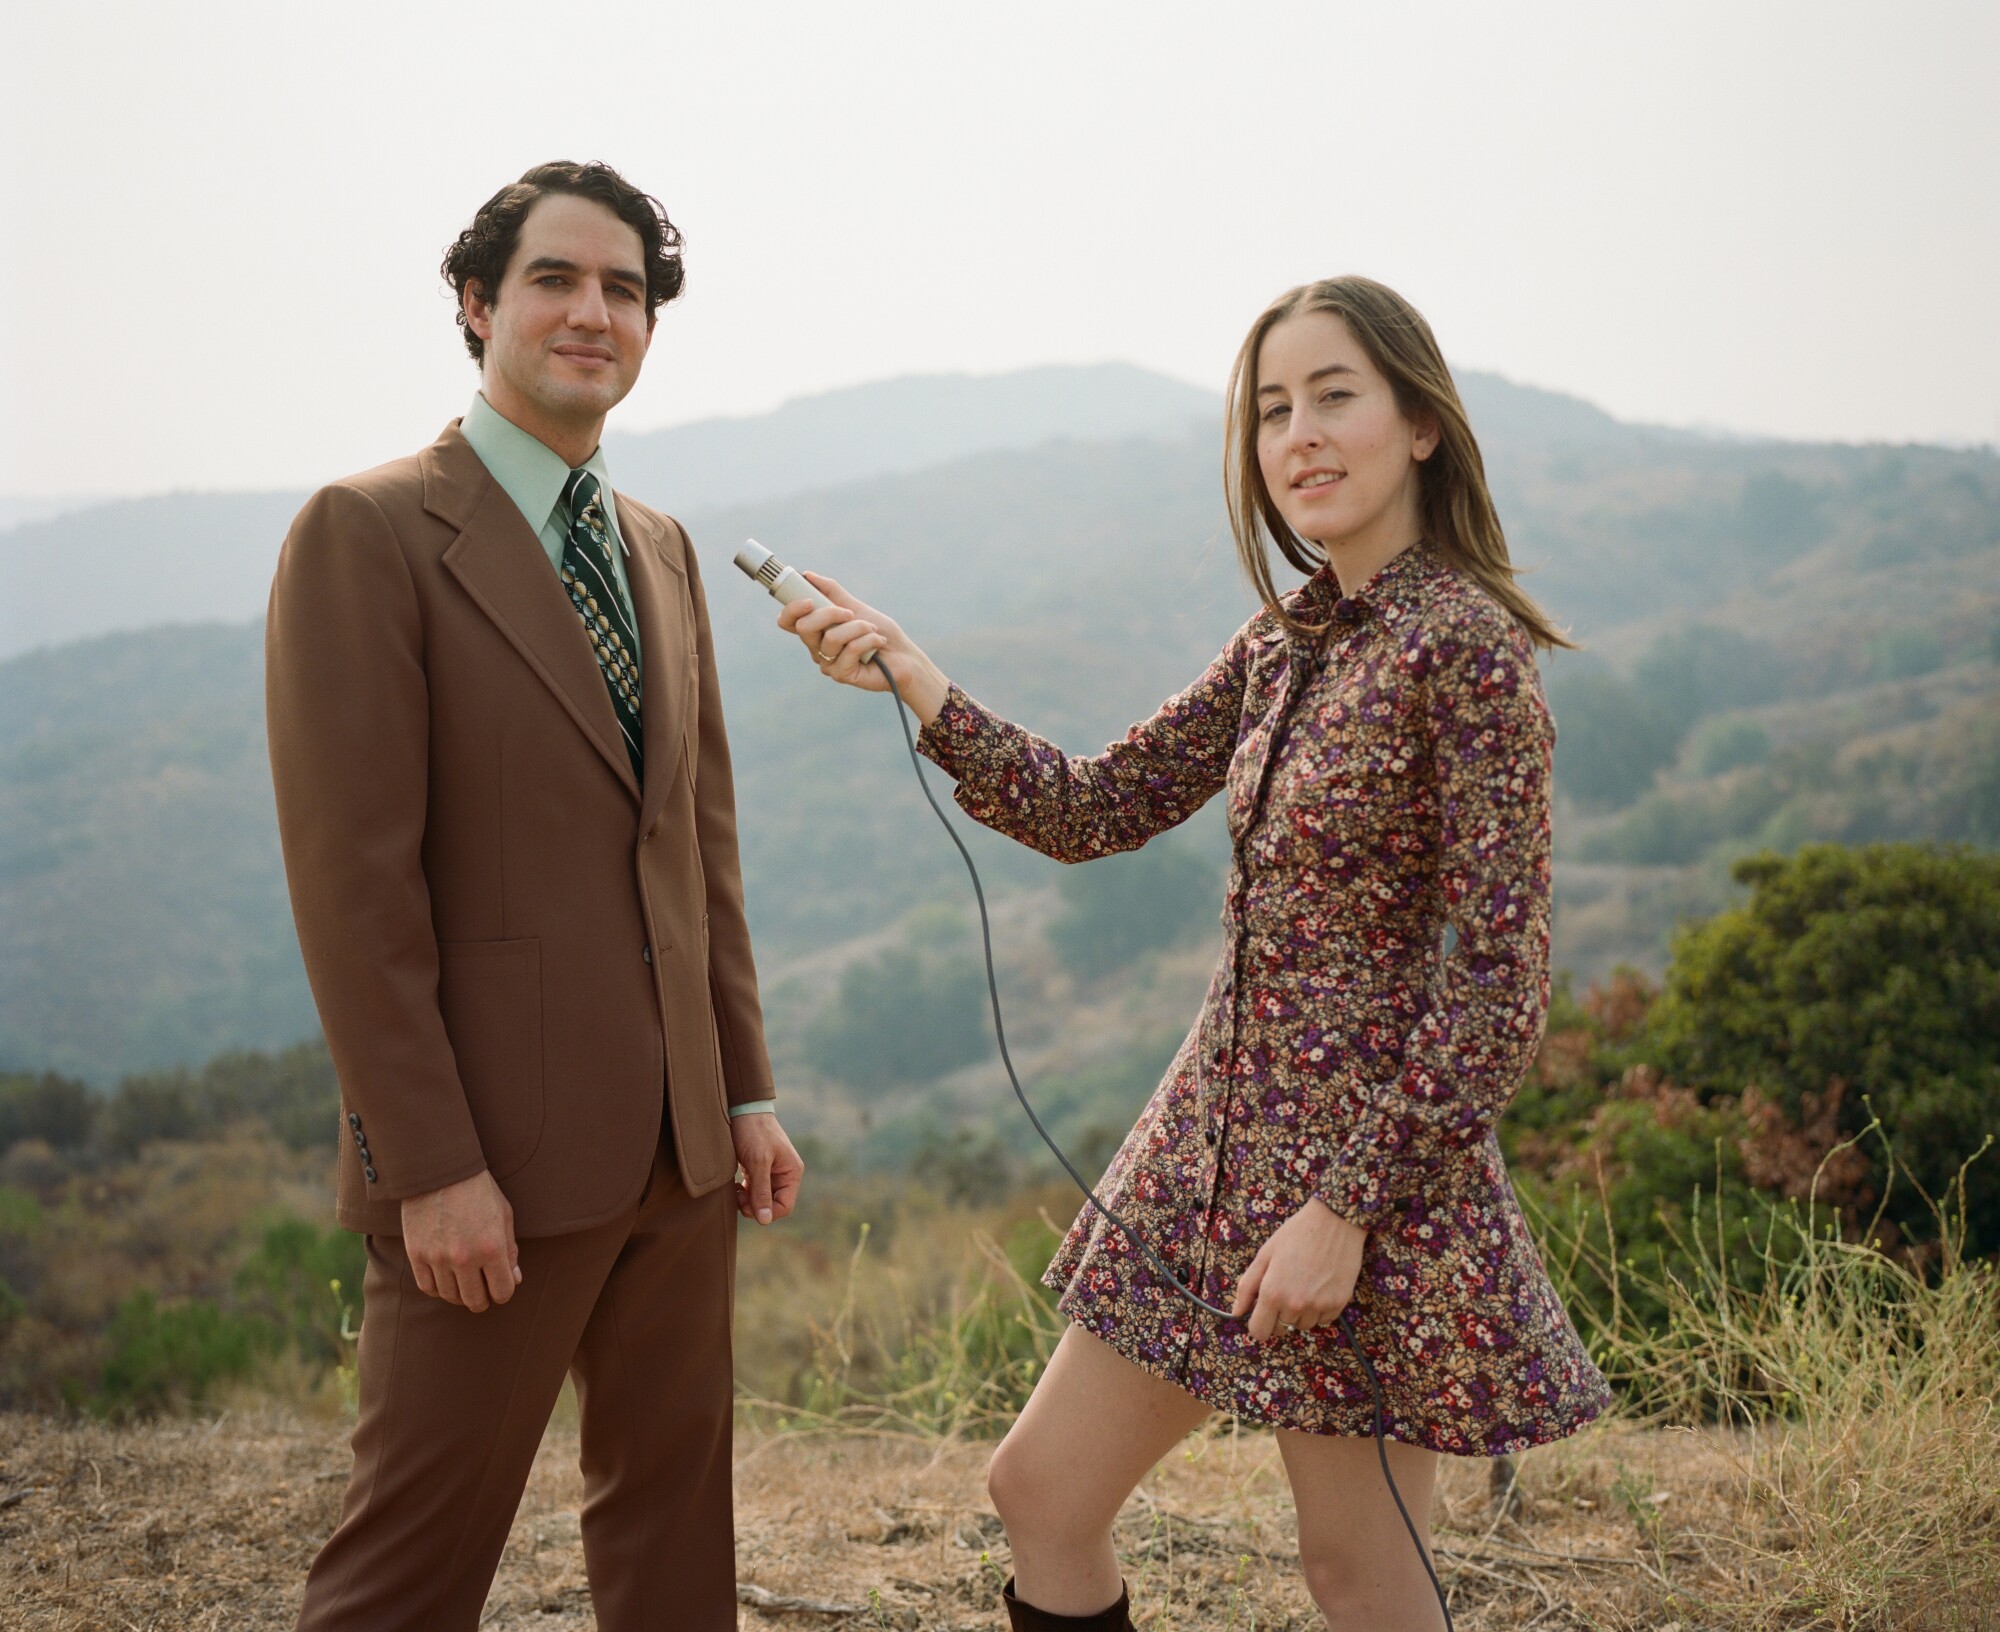 Alana Haim holds up a microphone to Benny Safdie in a scene from 